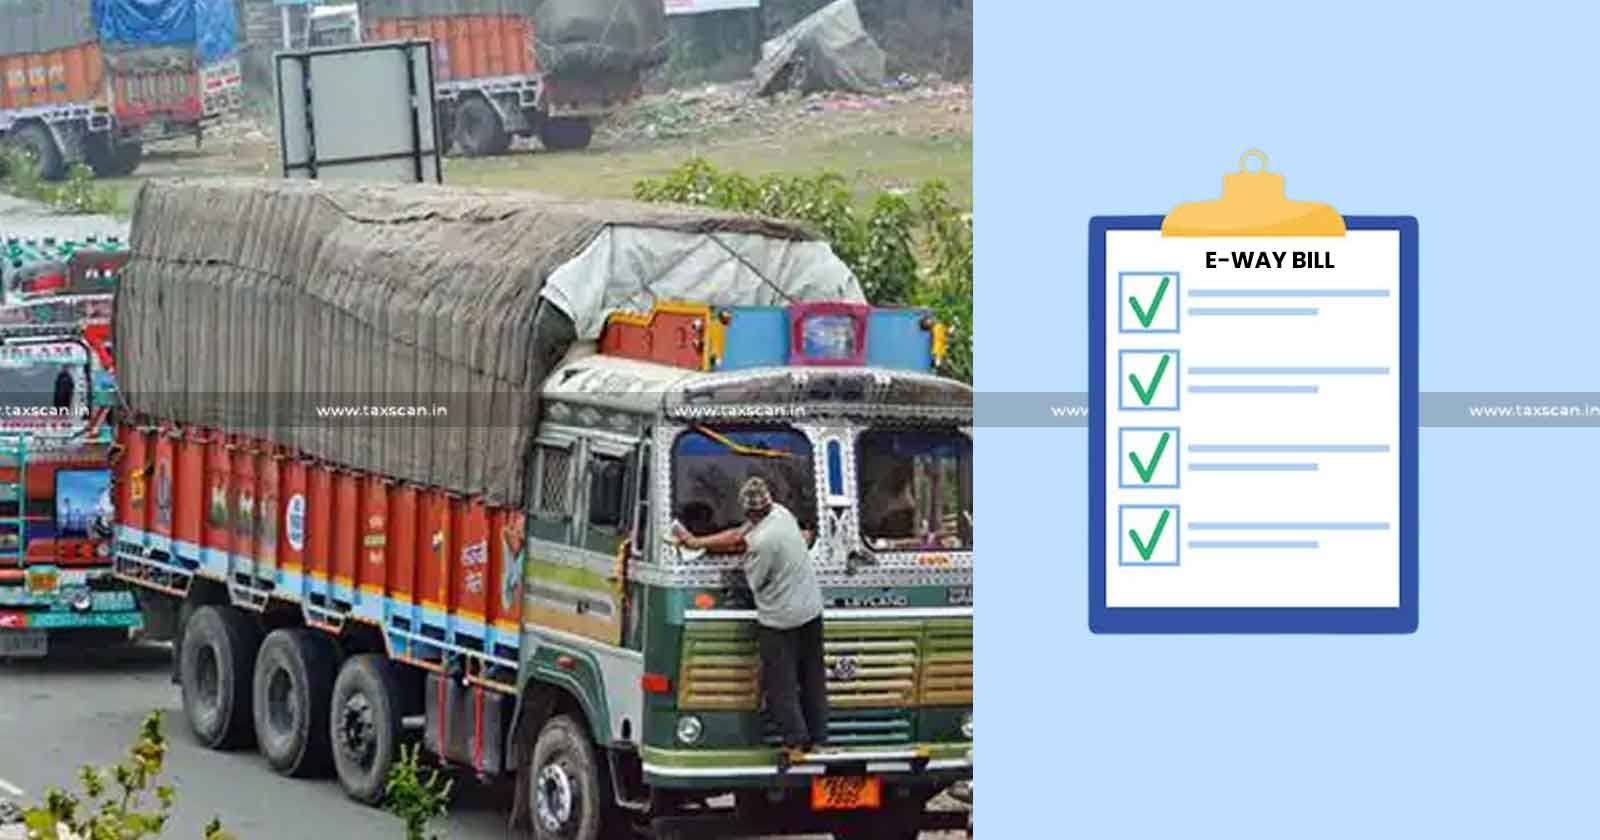 Reuse of E-way Bills - Invoices - Evade Tax Payment - Punjab and Haryana High Court - taxscan